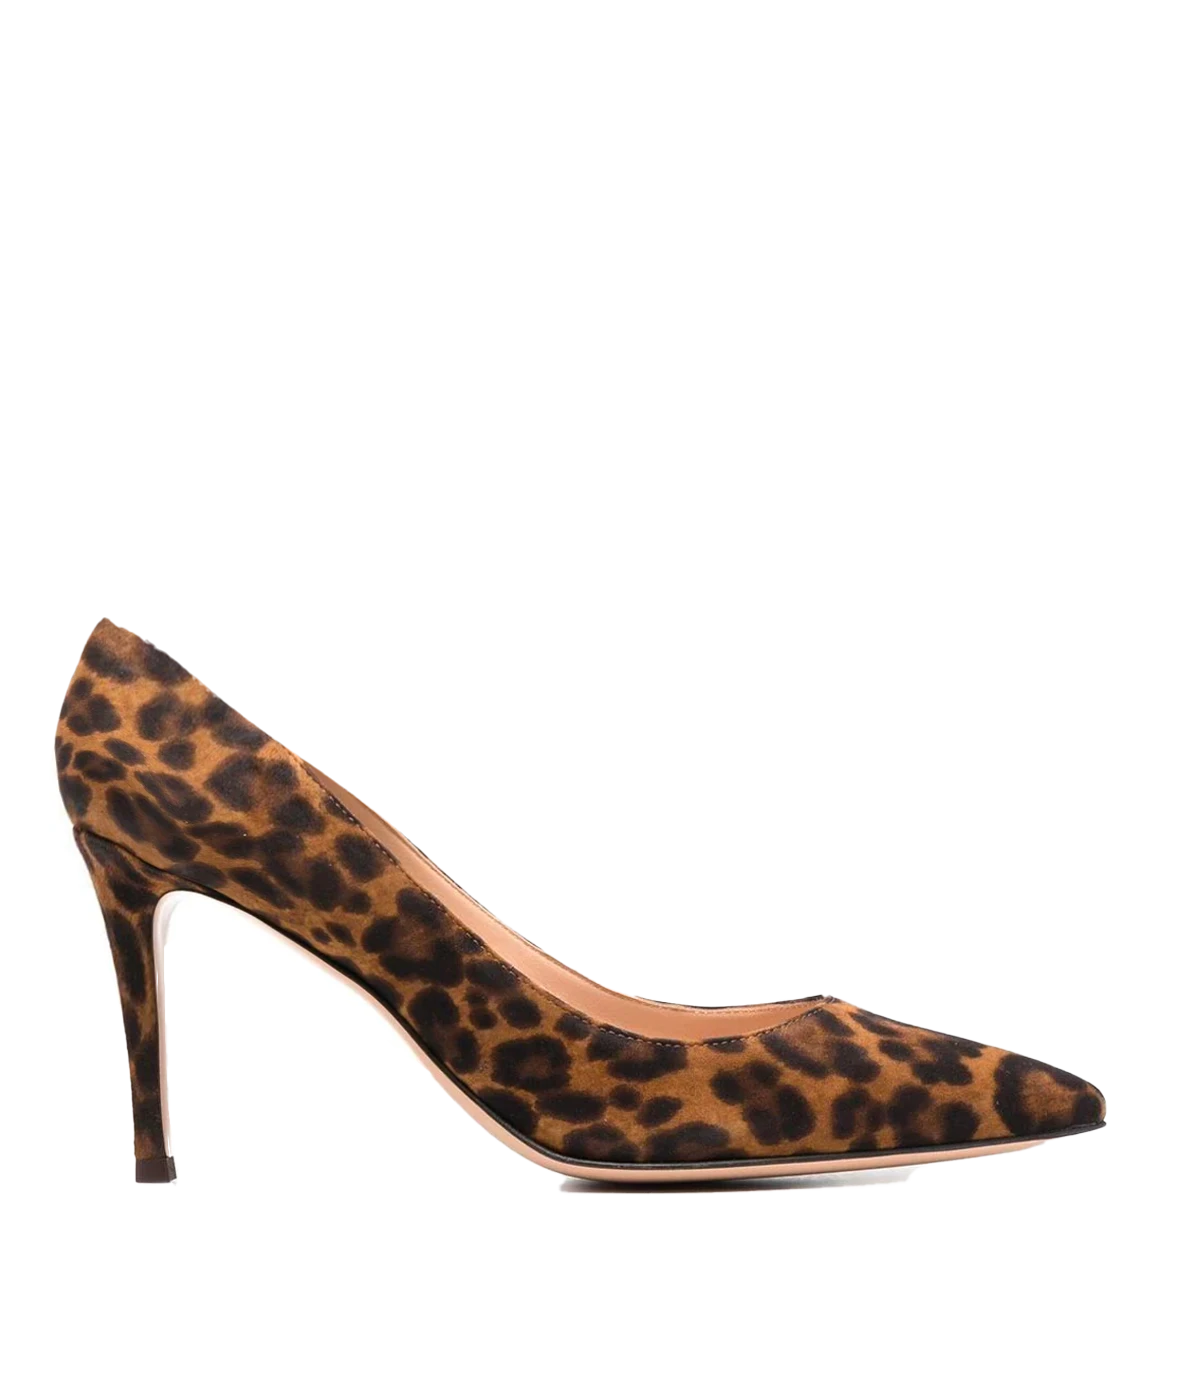 Image of a 85mm leather pump, in a leopard print. Featuring a pointed toe and beige sole.